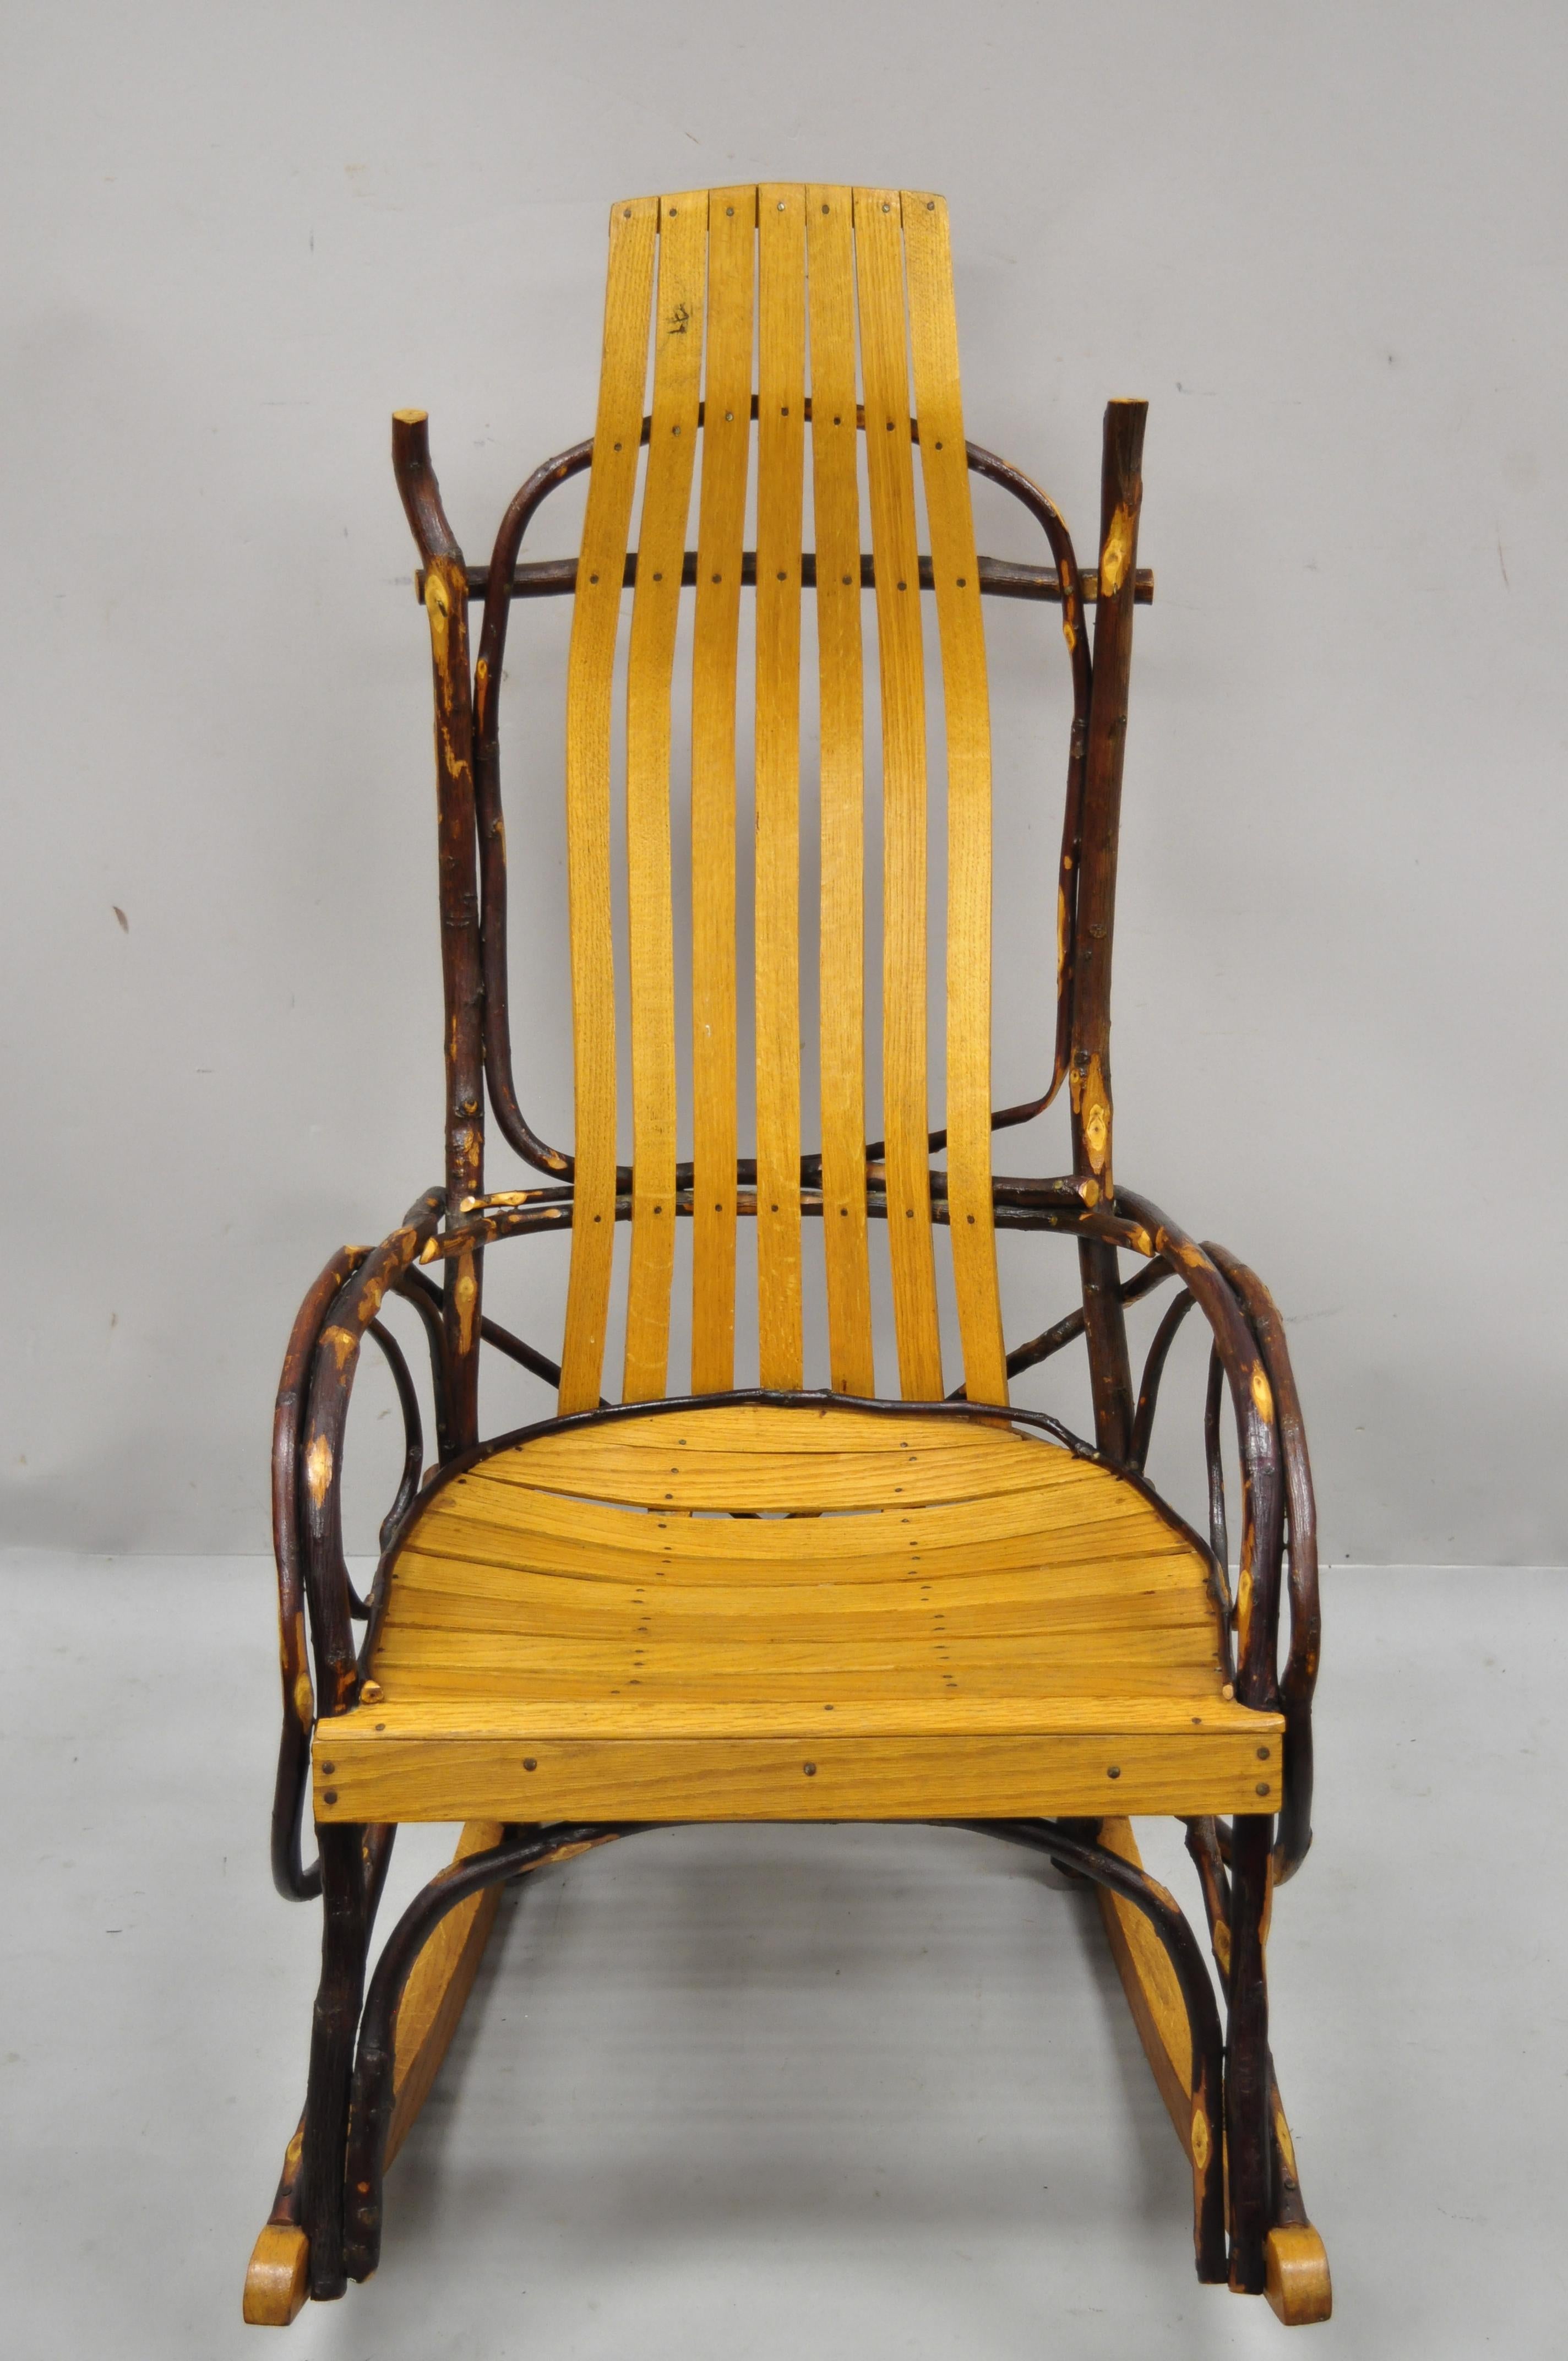 Vintage Adirondack tree branch twig Arts & Crafts primitive rocker rocking chair. Item features handmade tree branch form, wood slats, very nice vintage item, quality American craftsmanship, great style and form. Circa mid 20th century.